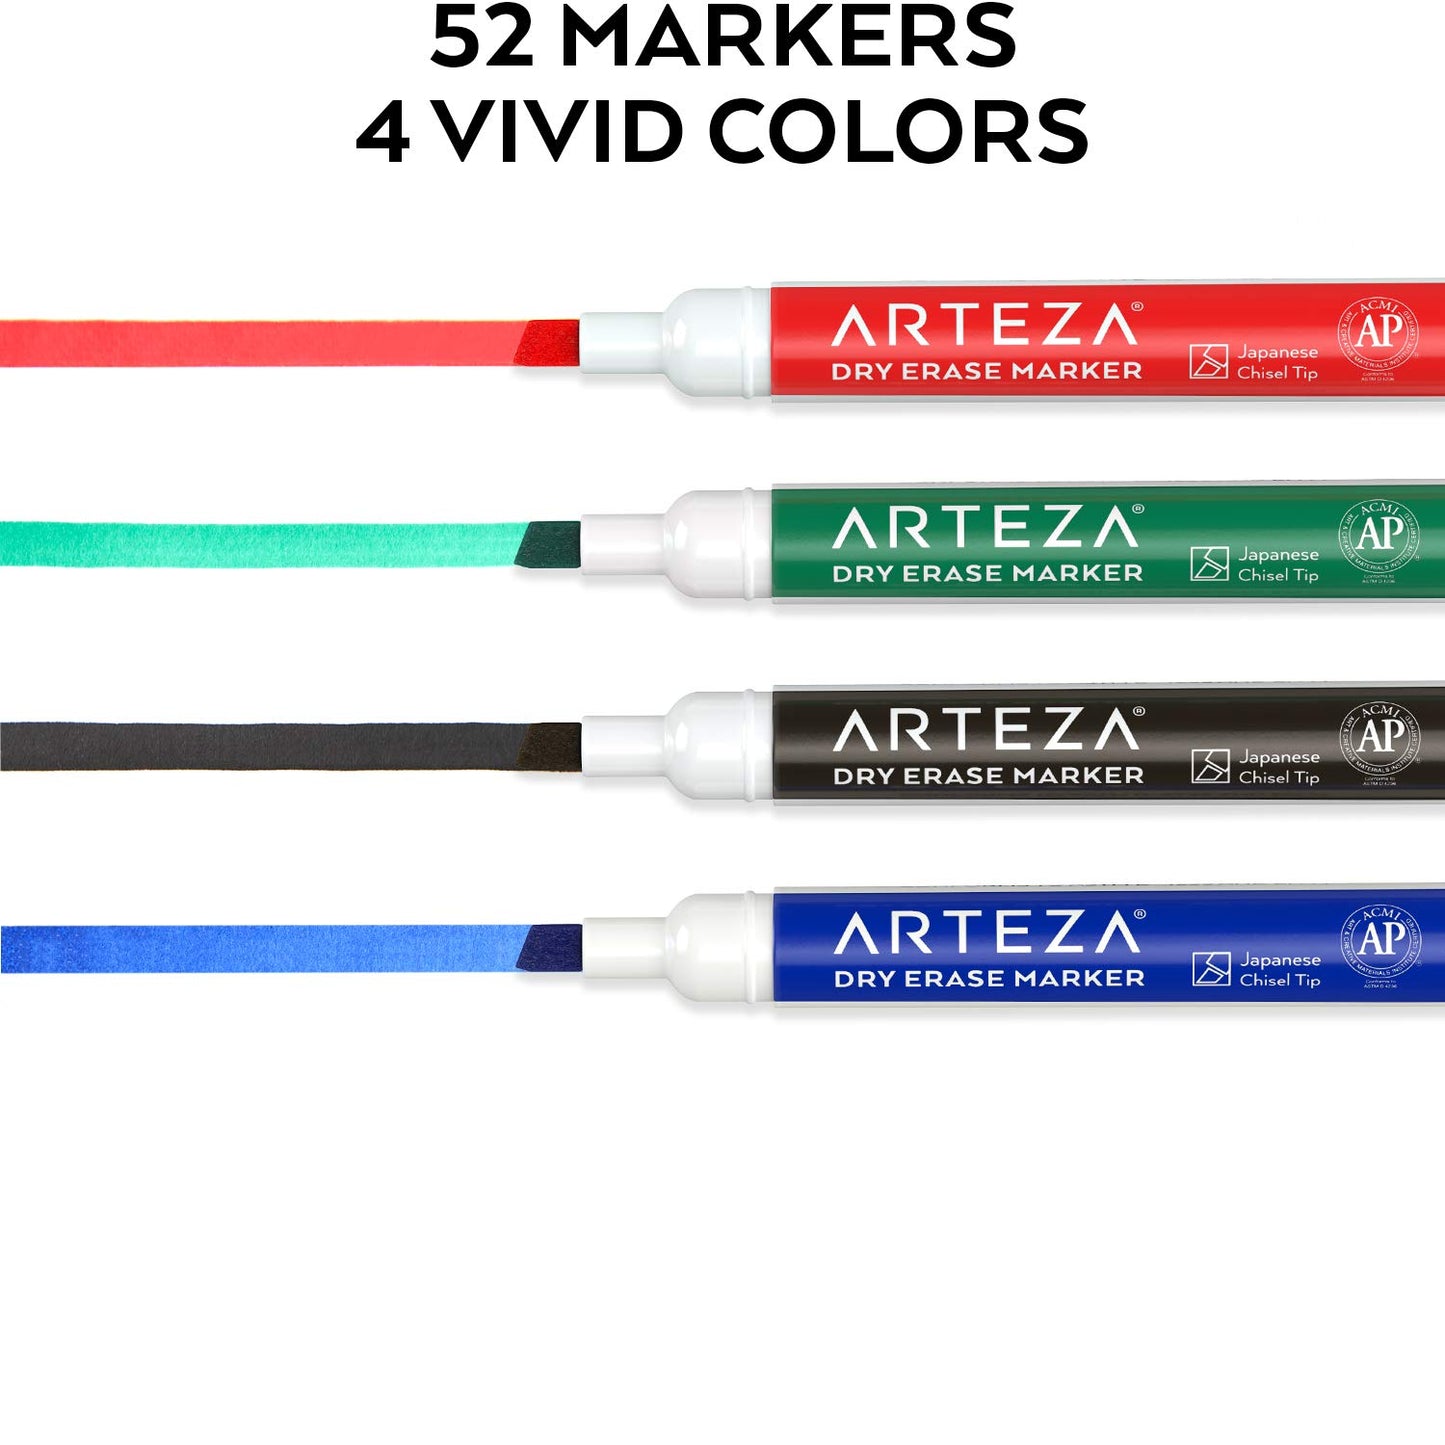 Arteza Dry Erase Markers, 4 Assorted Colors, Chisel Tip - Set of 52